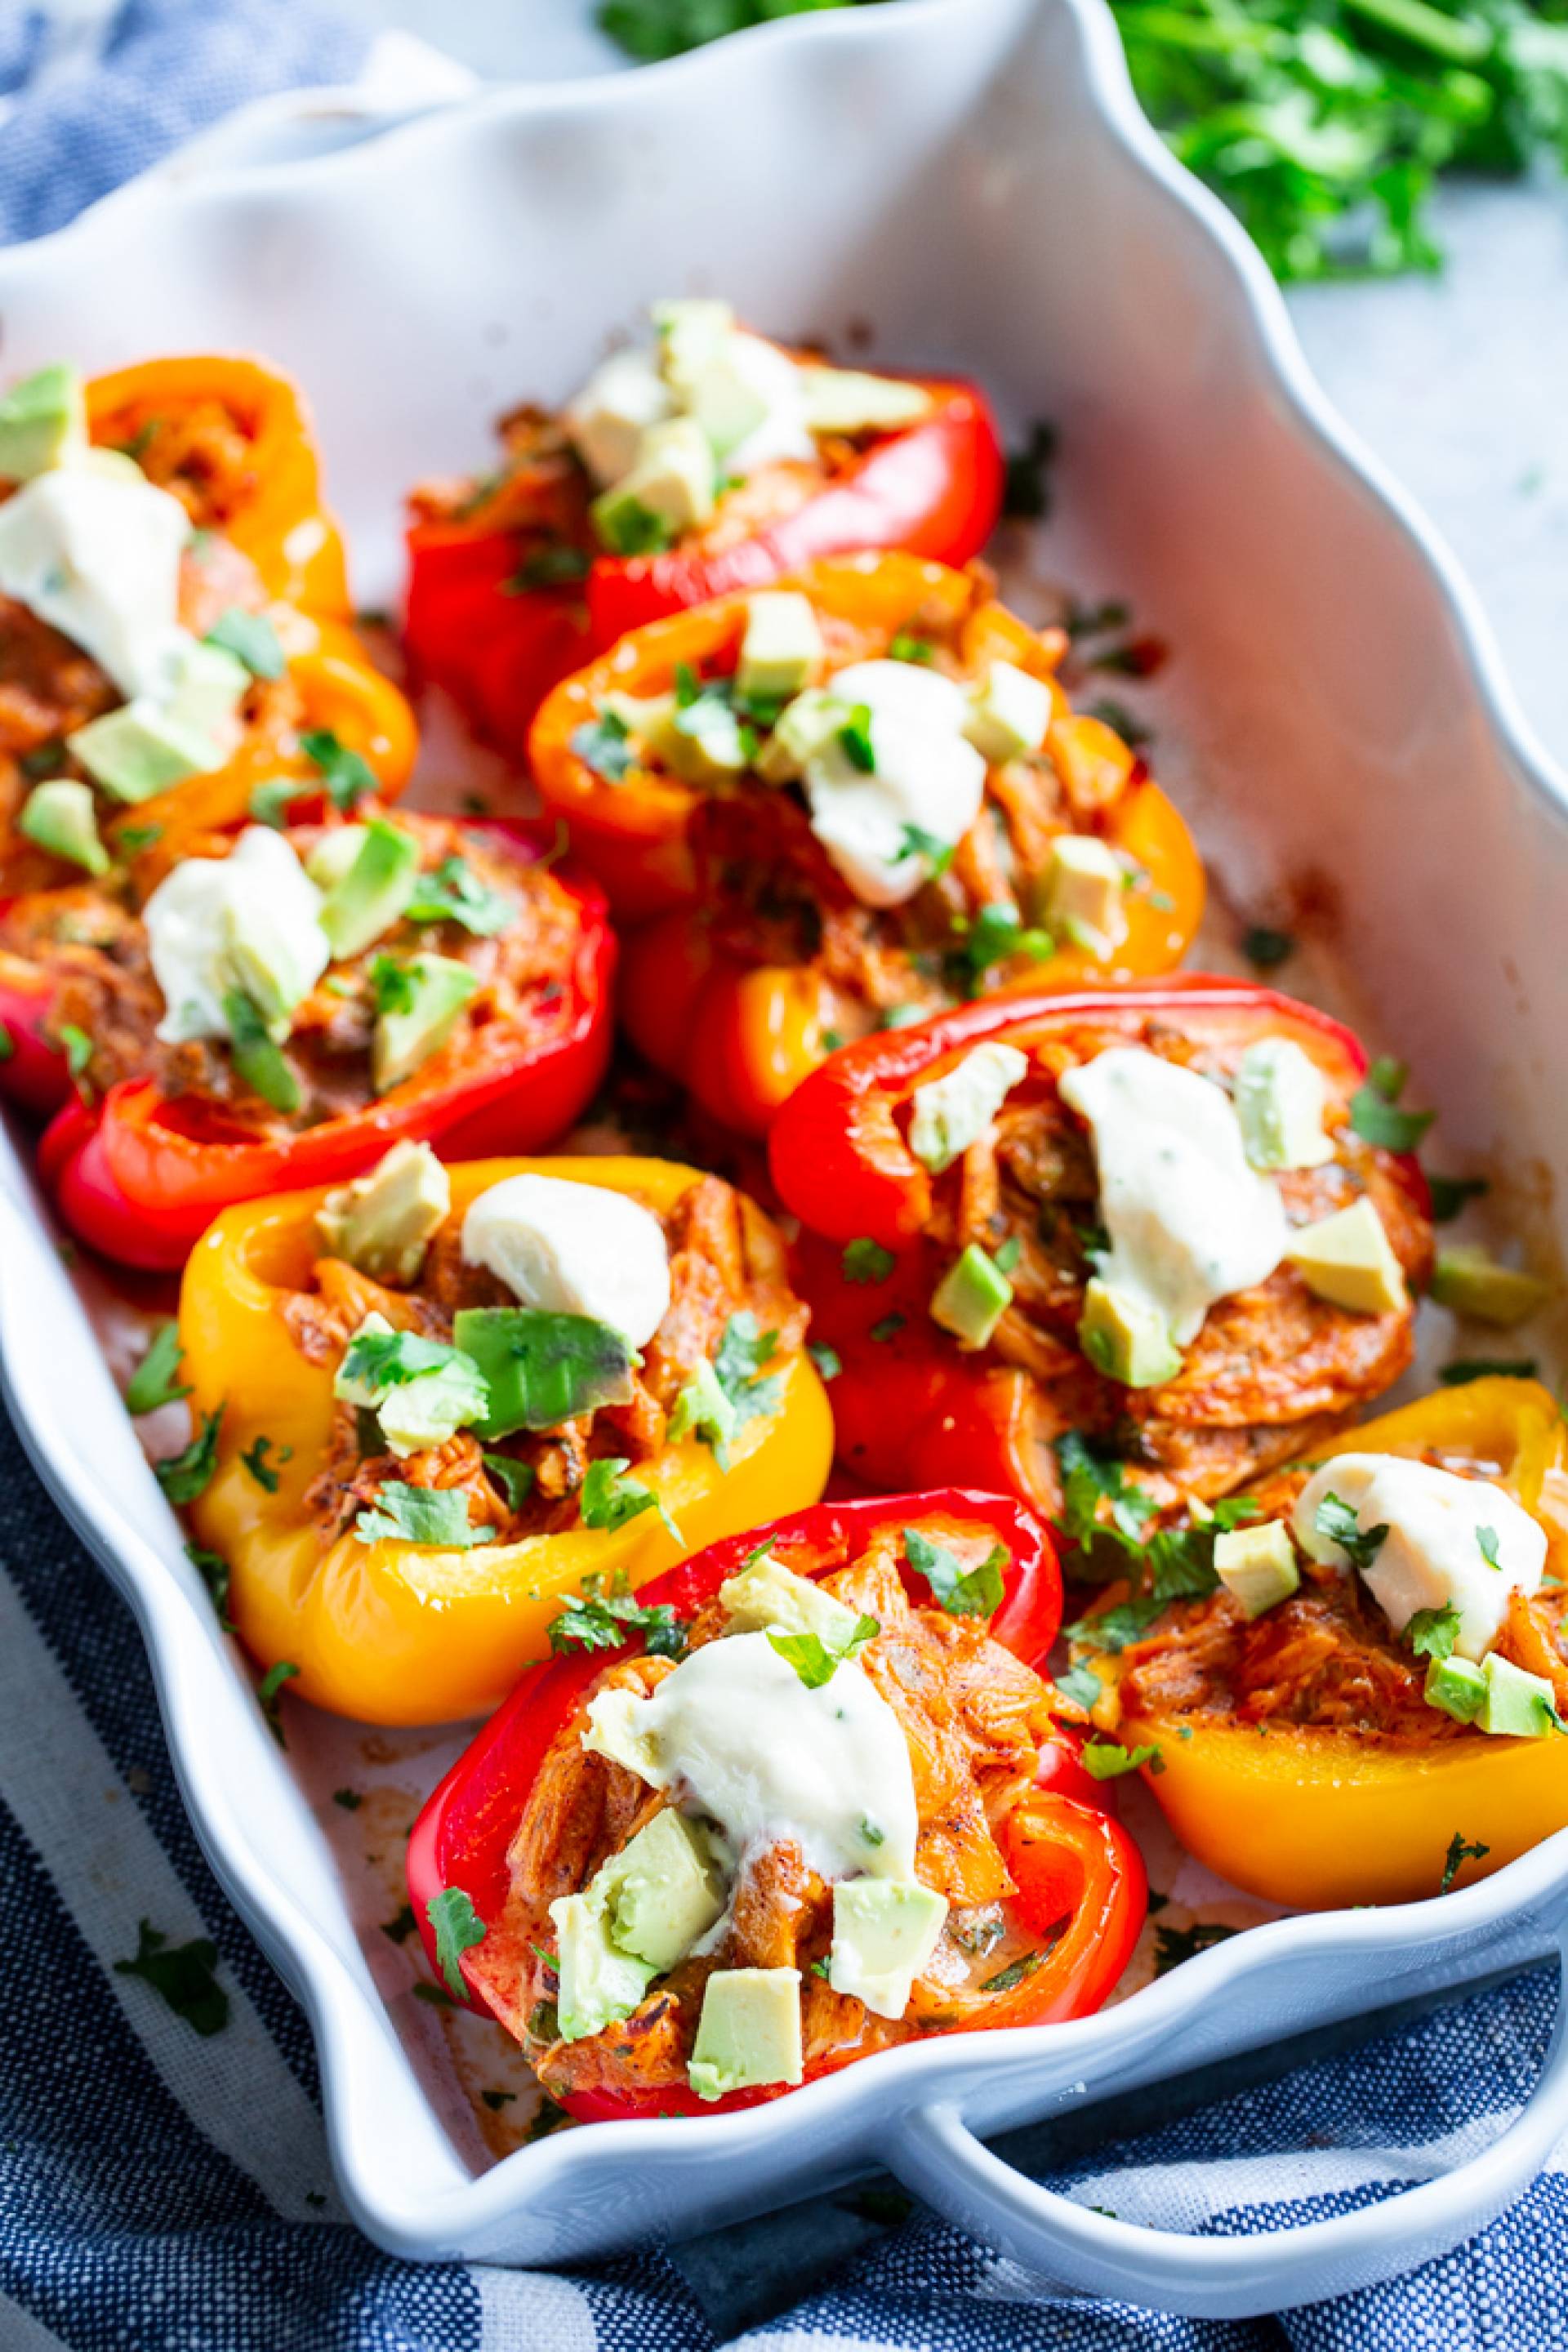 Whole30 Shredded Beef Stuffed Bell Peppers